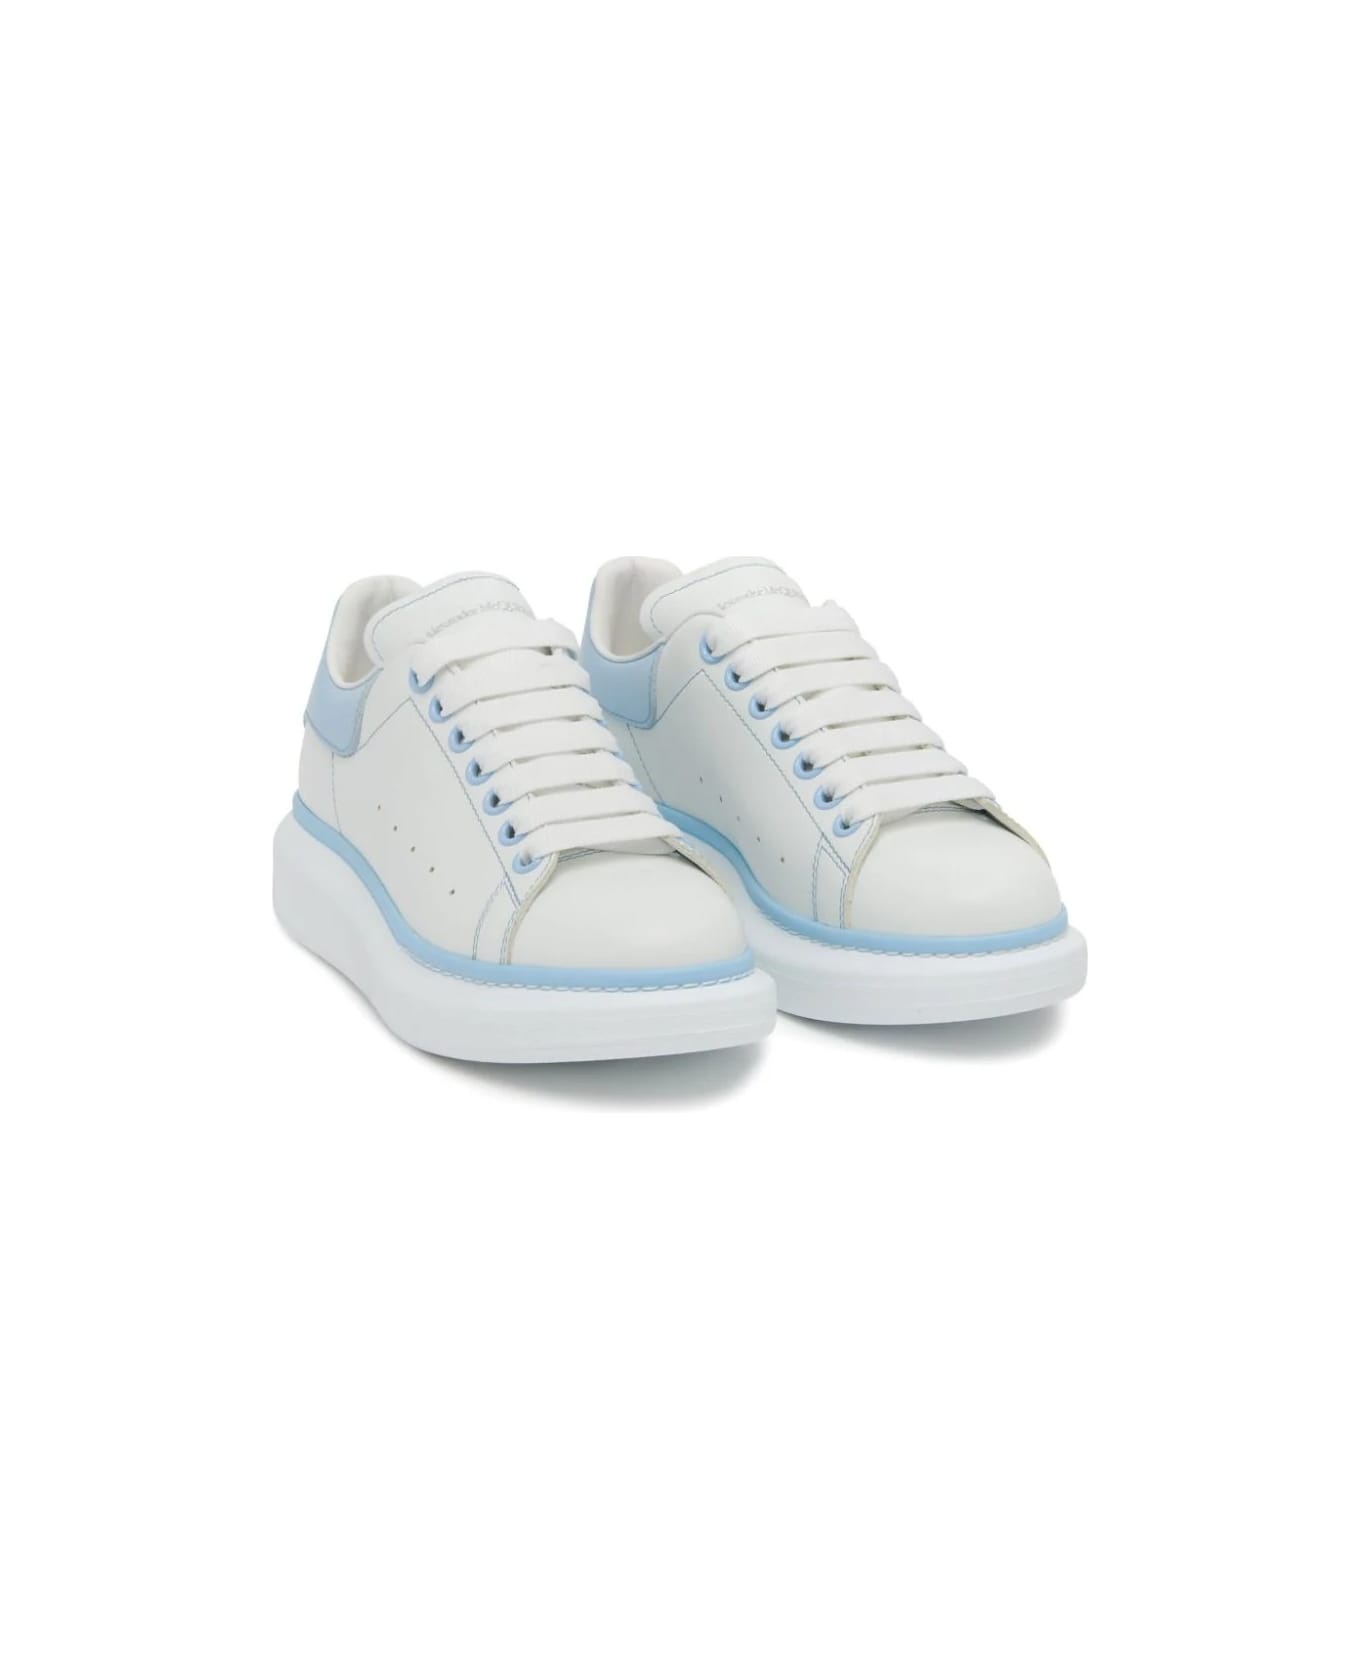 White Oversized Sneakers With Powder Blue Details - 3